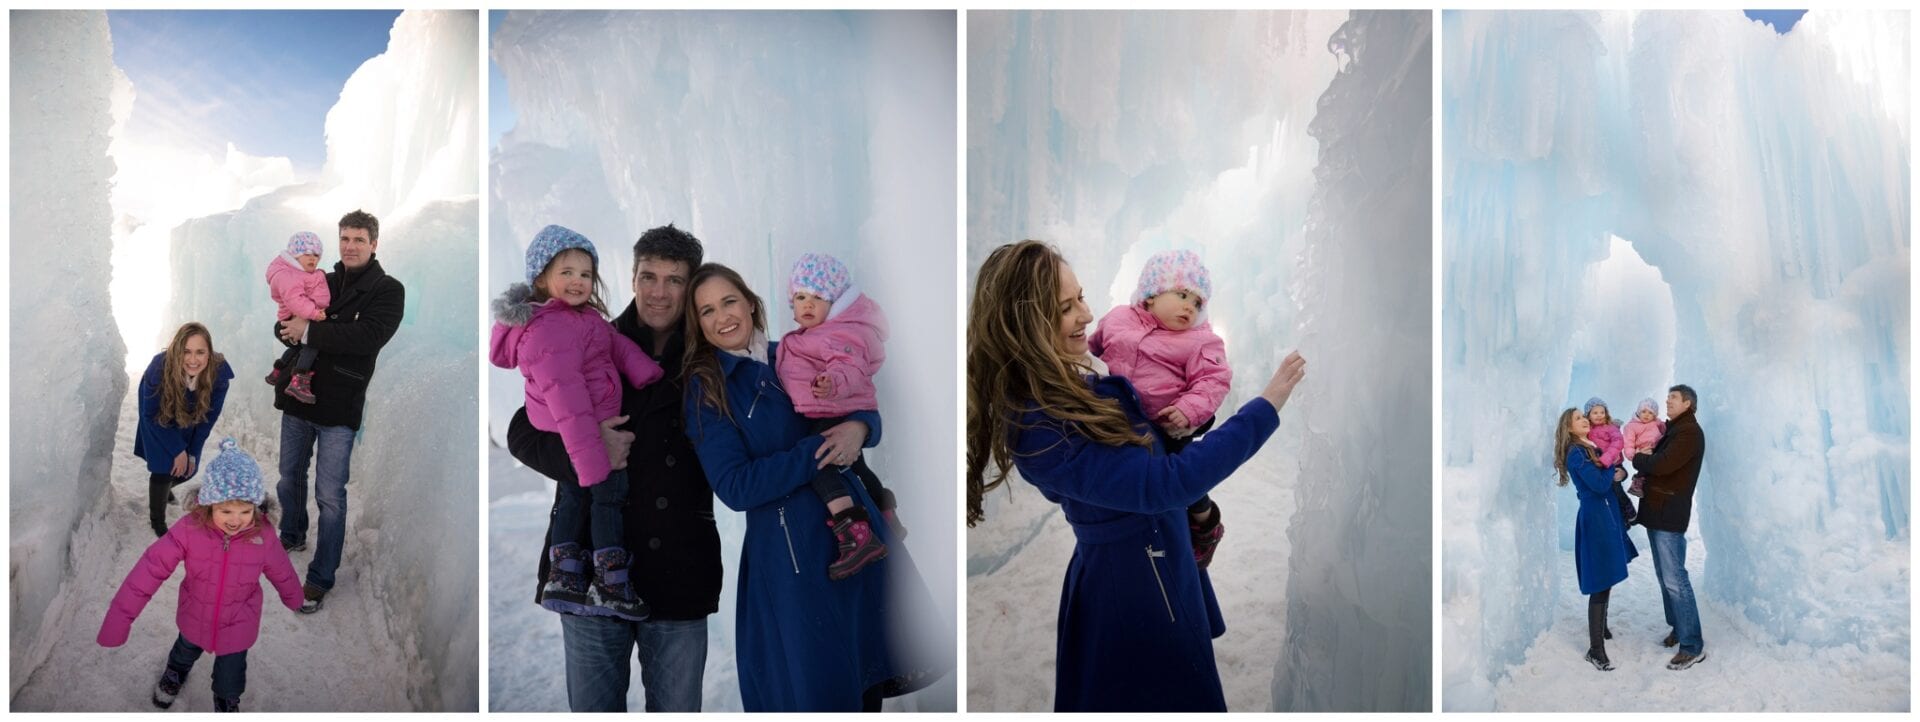 Family-Outdoor-Portrait-Photography-Ice-Castles